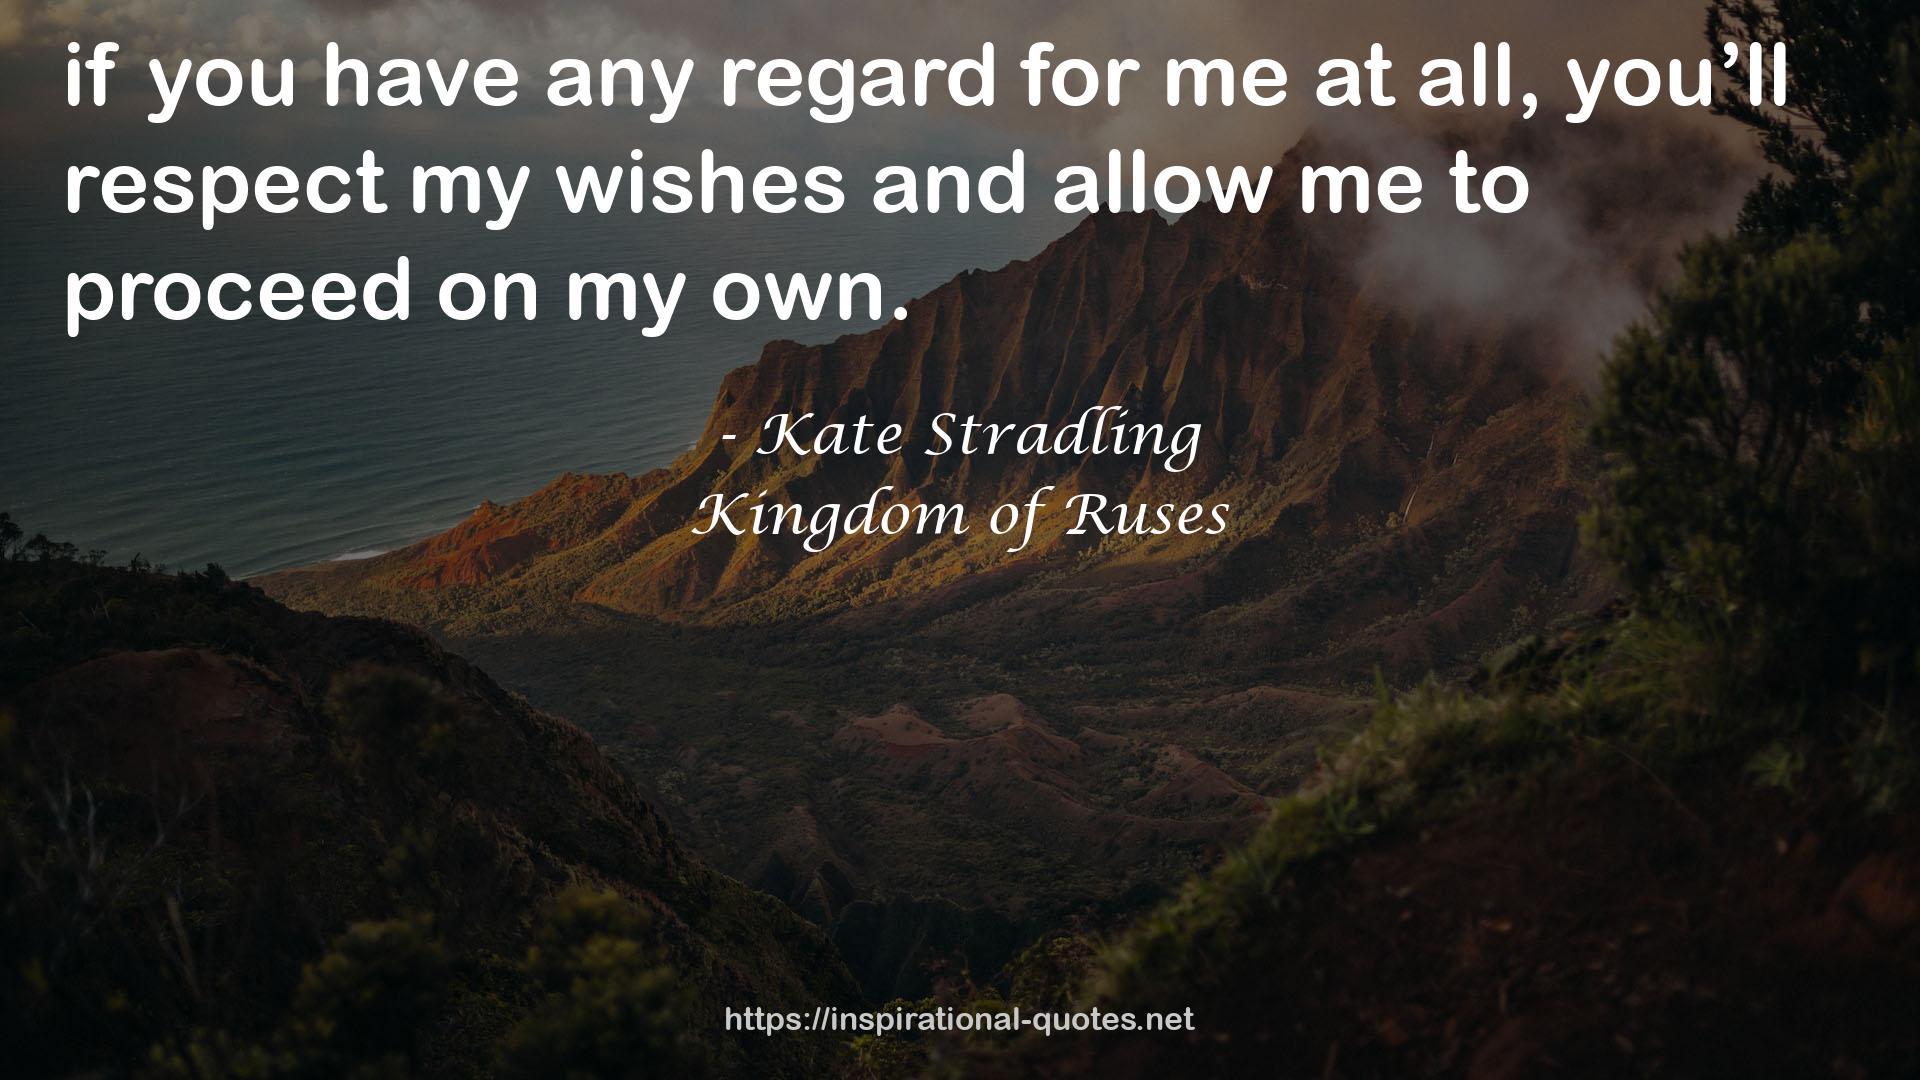 Kingdom of Ruses QUOTES